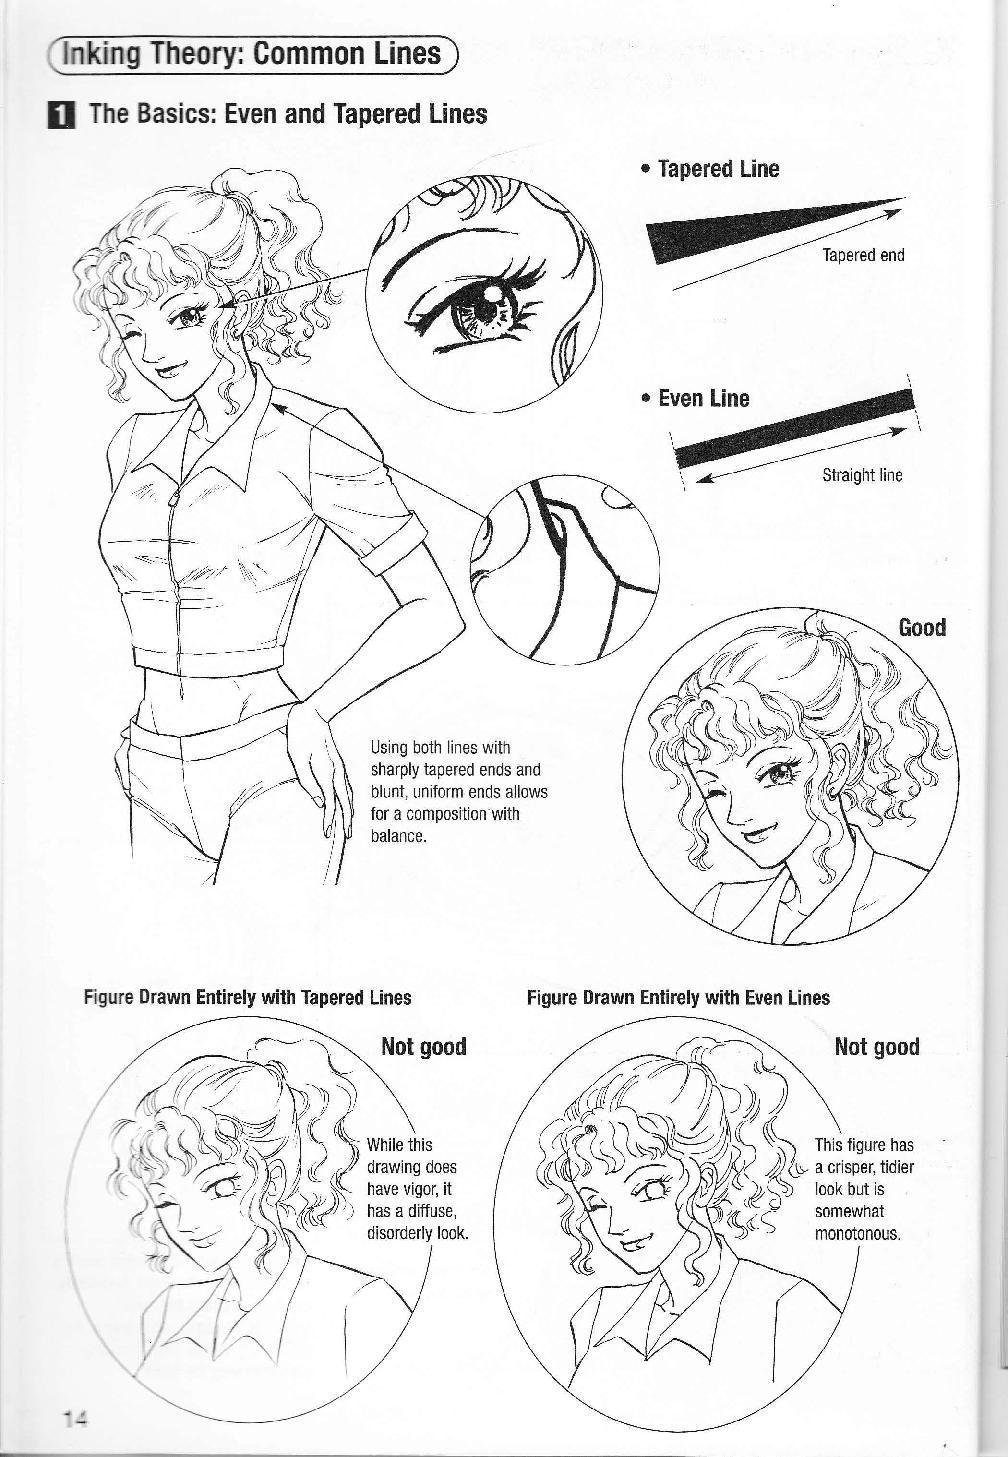 More How to Draw Manga Vol. 2 - Penning Characters 15